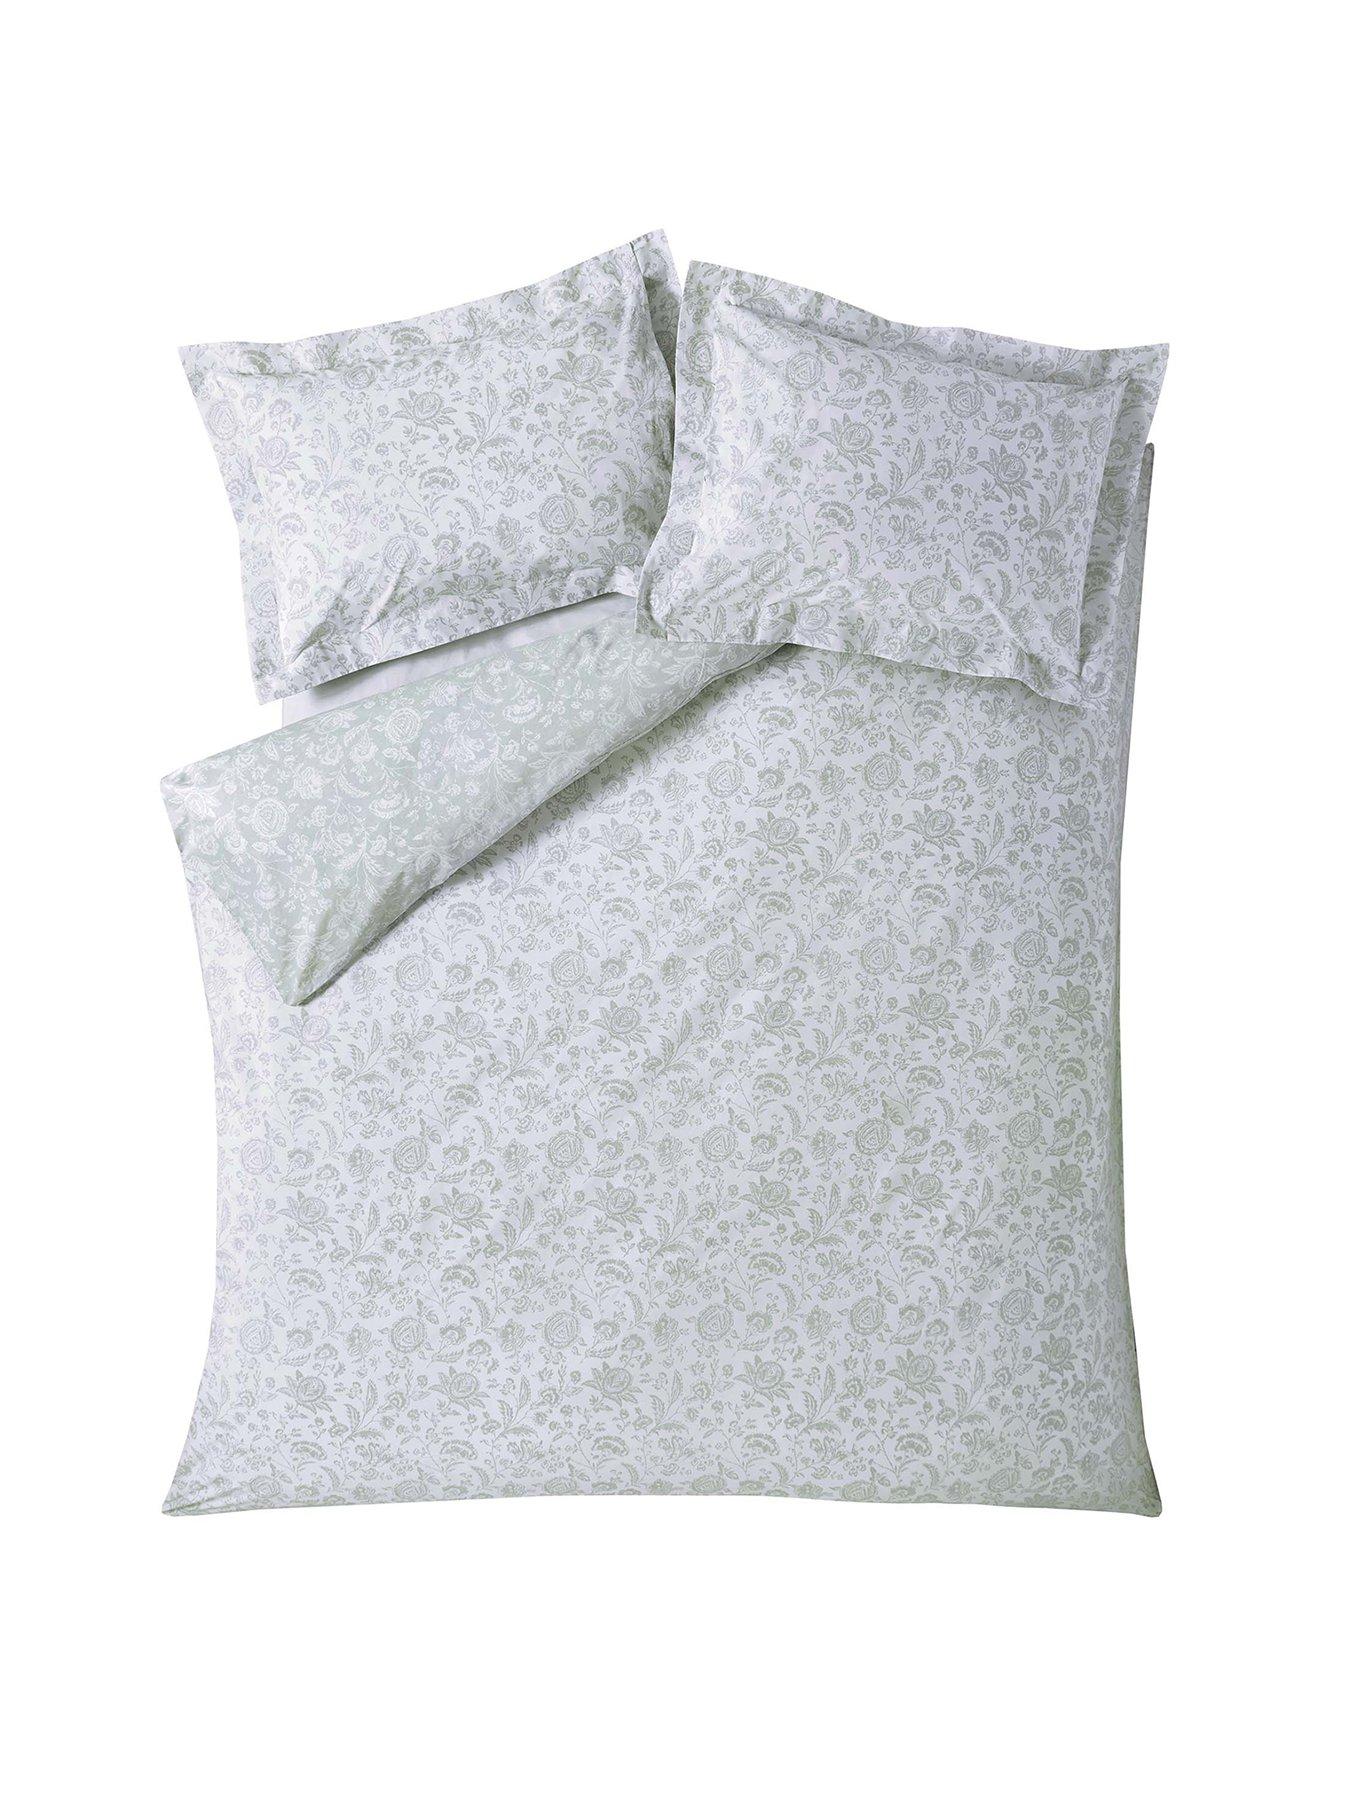 Cabbages Roses French Toile Cotton Percale Duvet Cover